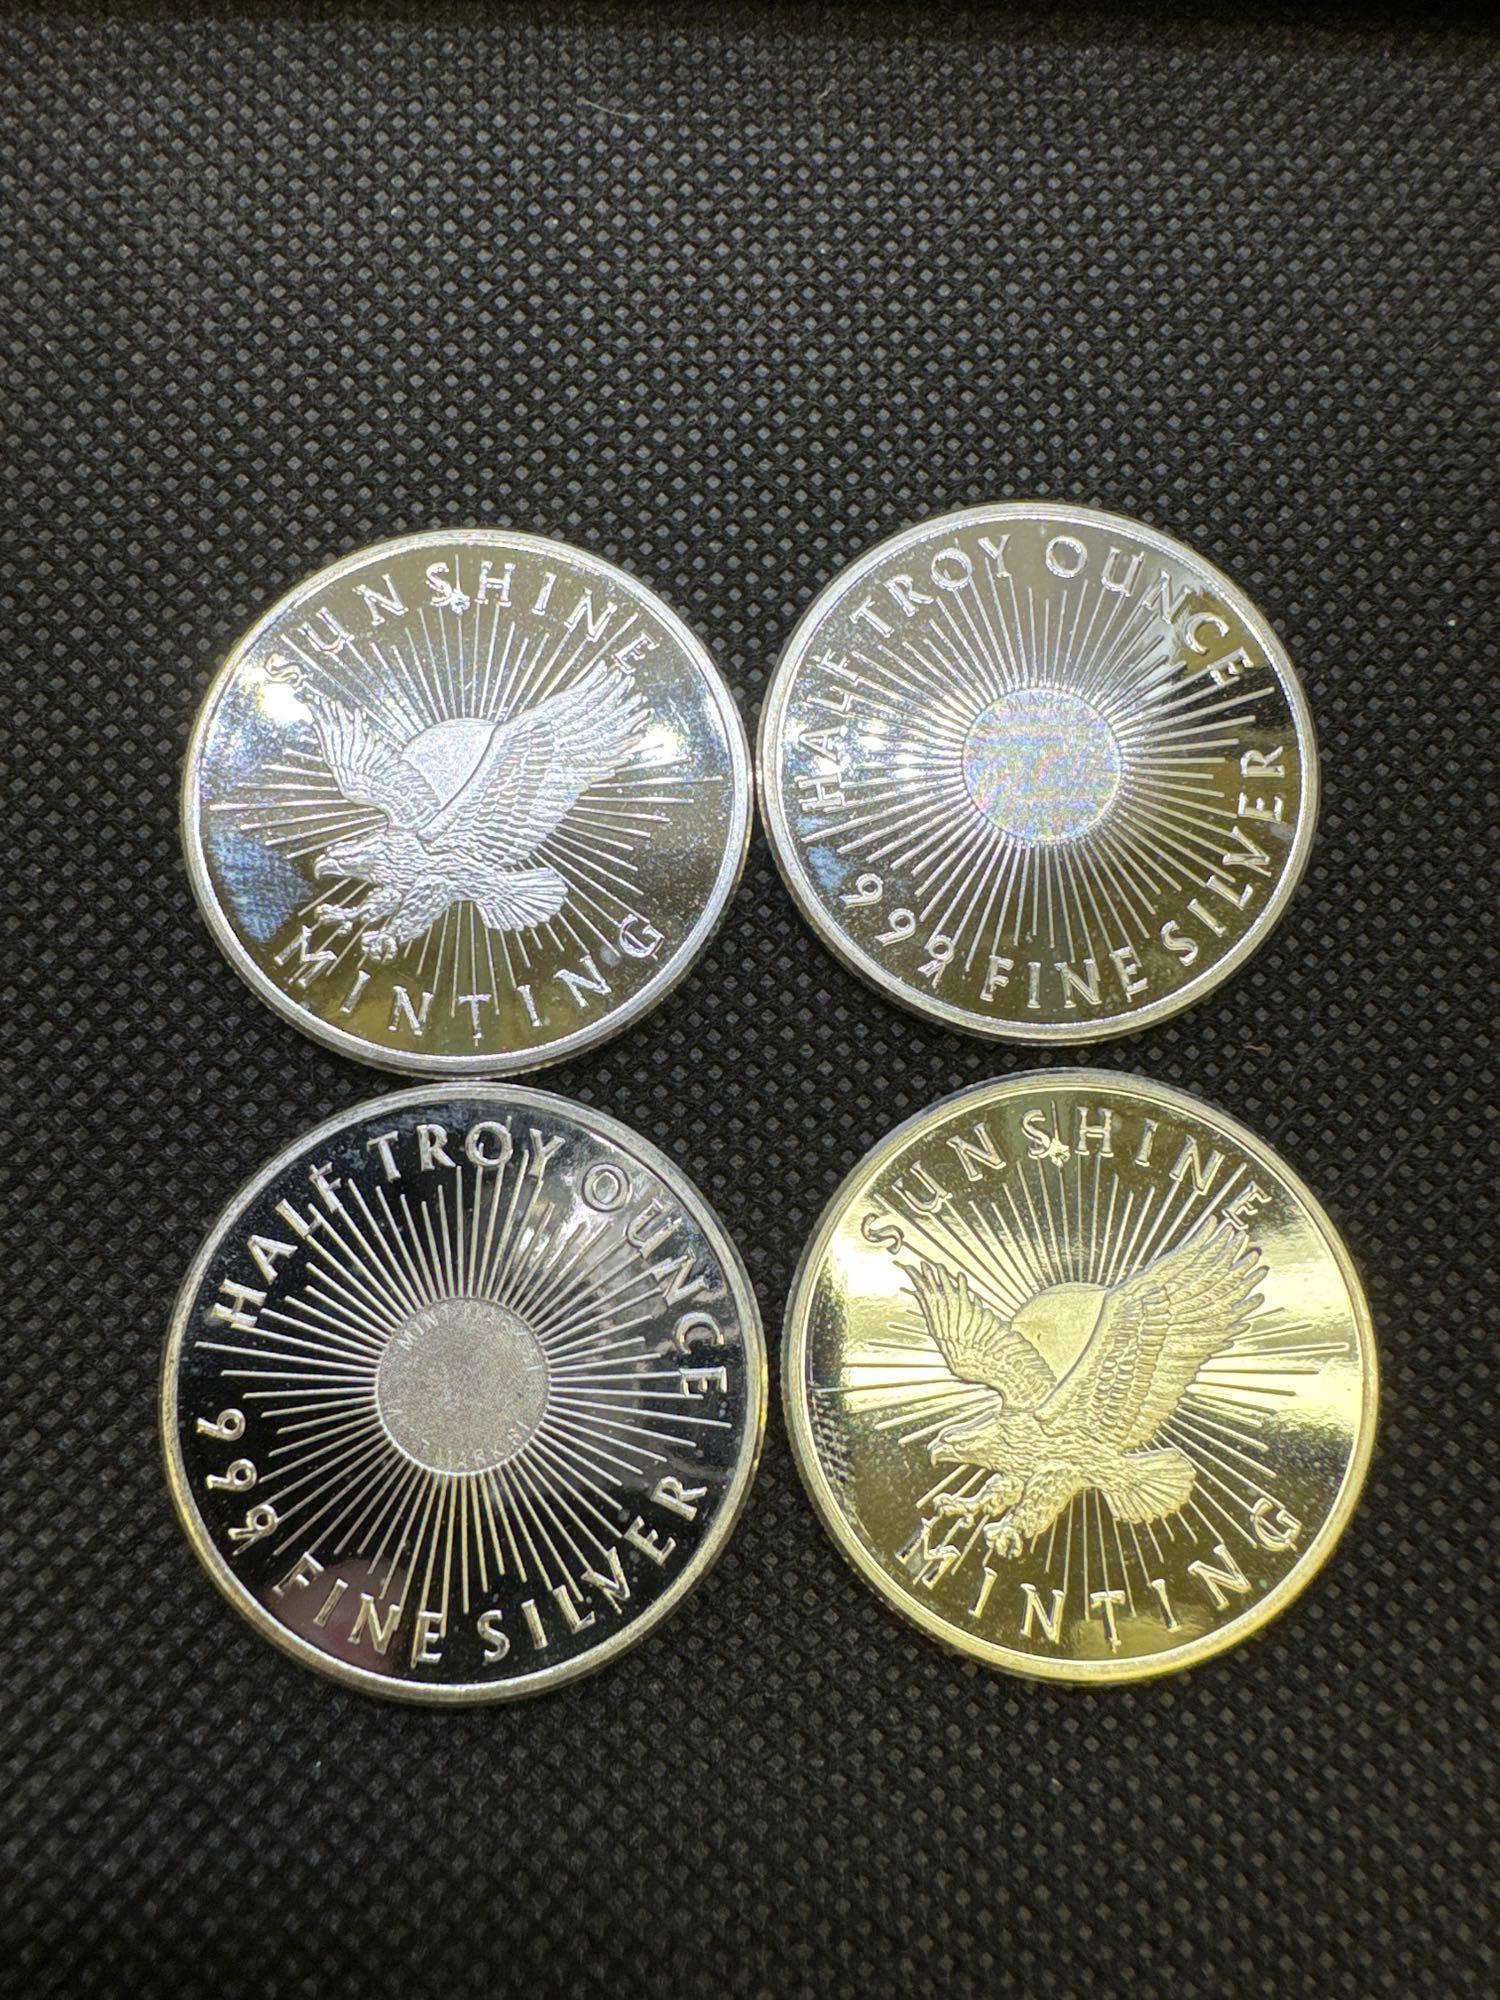 4x 1/2 Troy Oz Fine Silver Sunshine Minting Silver Bullion Coins 2 Oz Total Weight